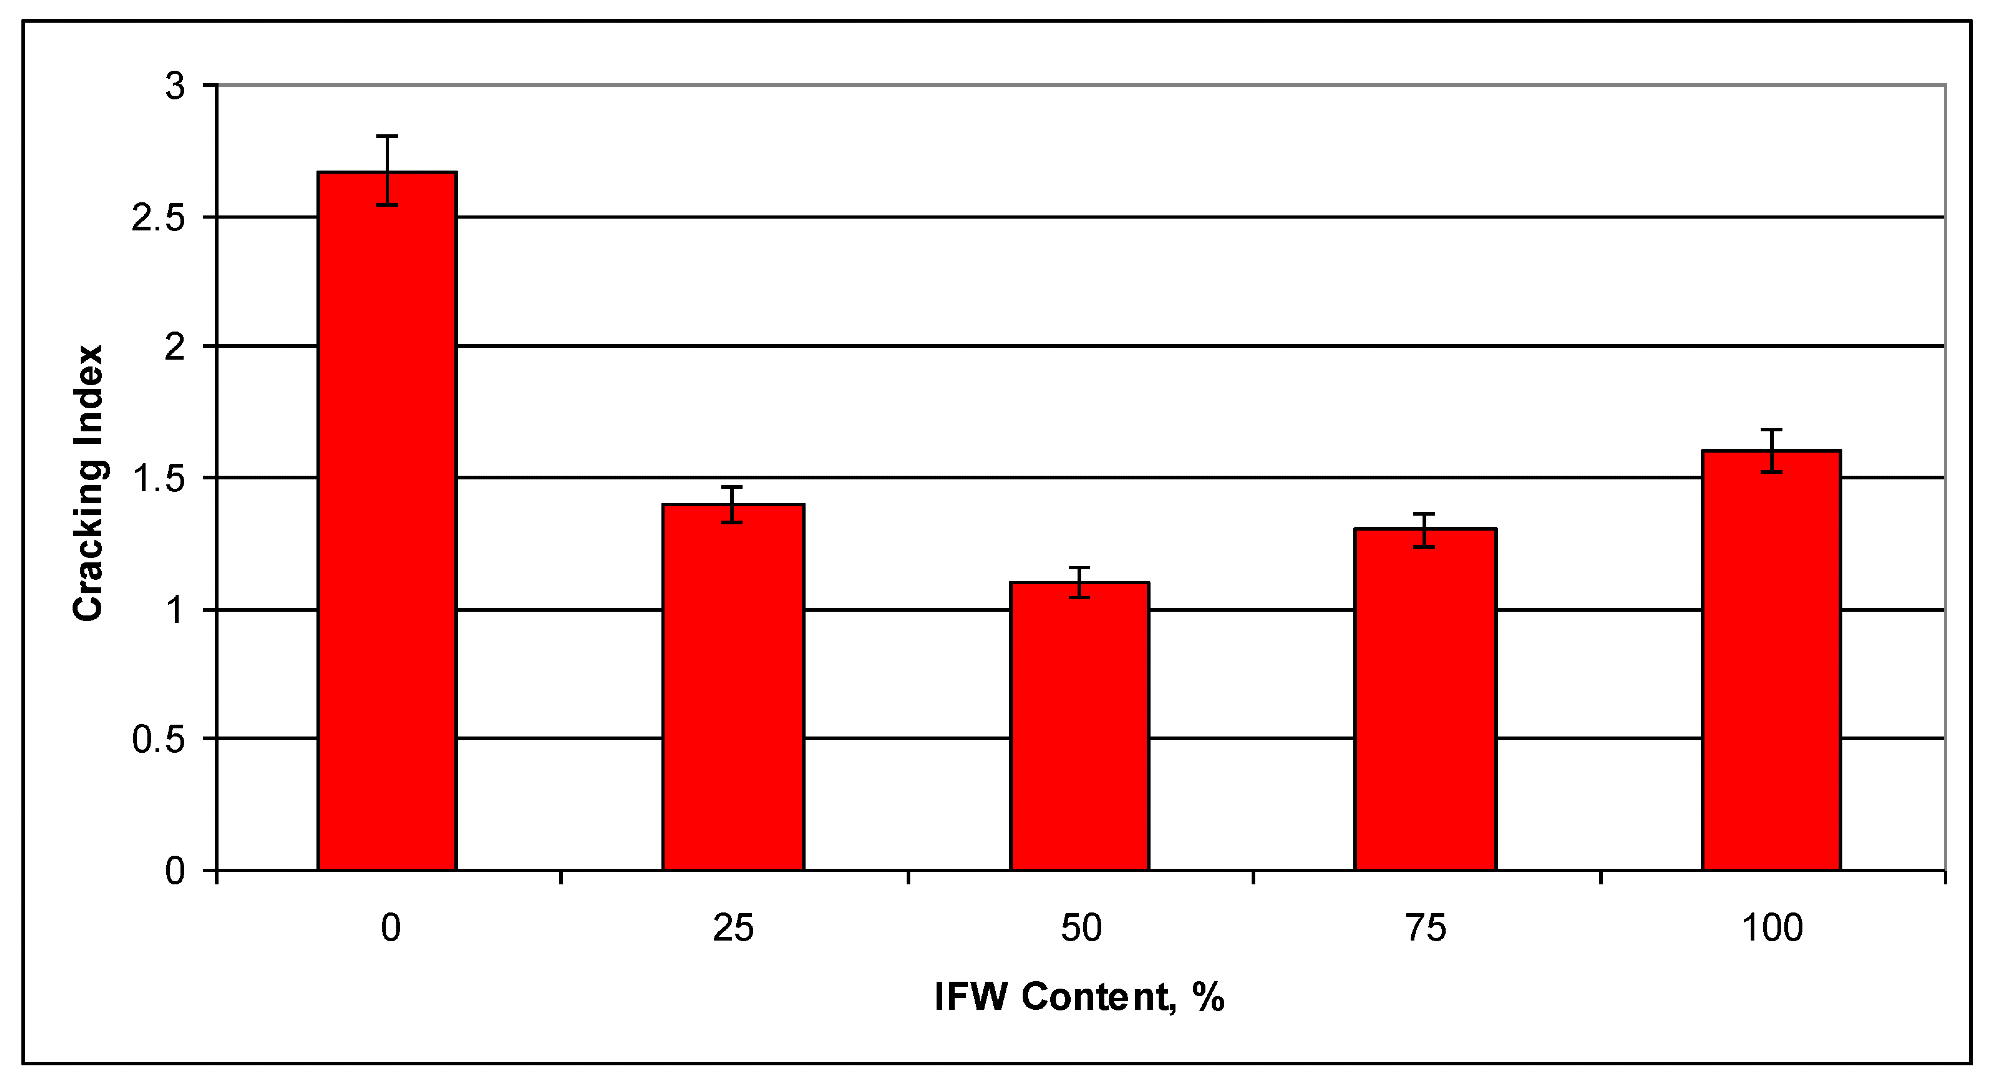 Crack index for CM and IFW compounds.